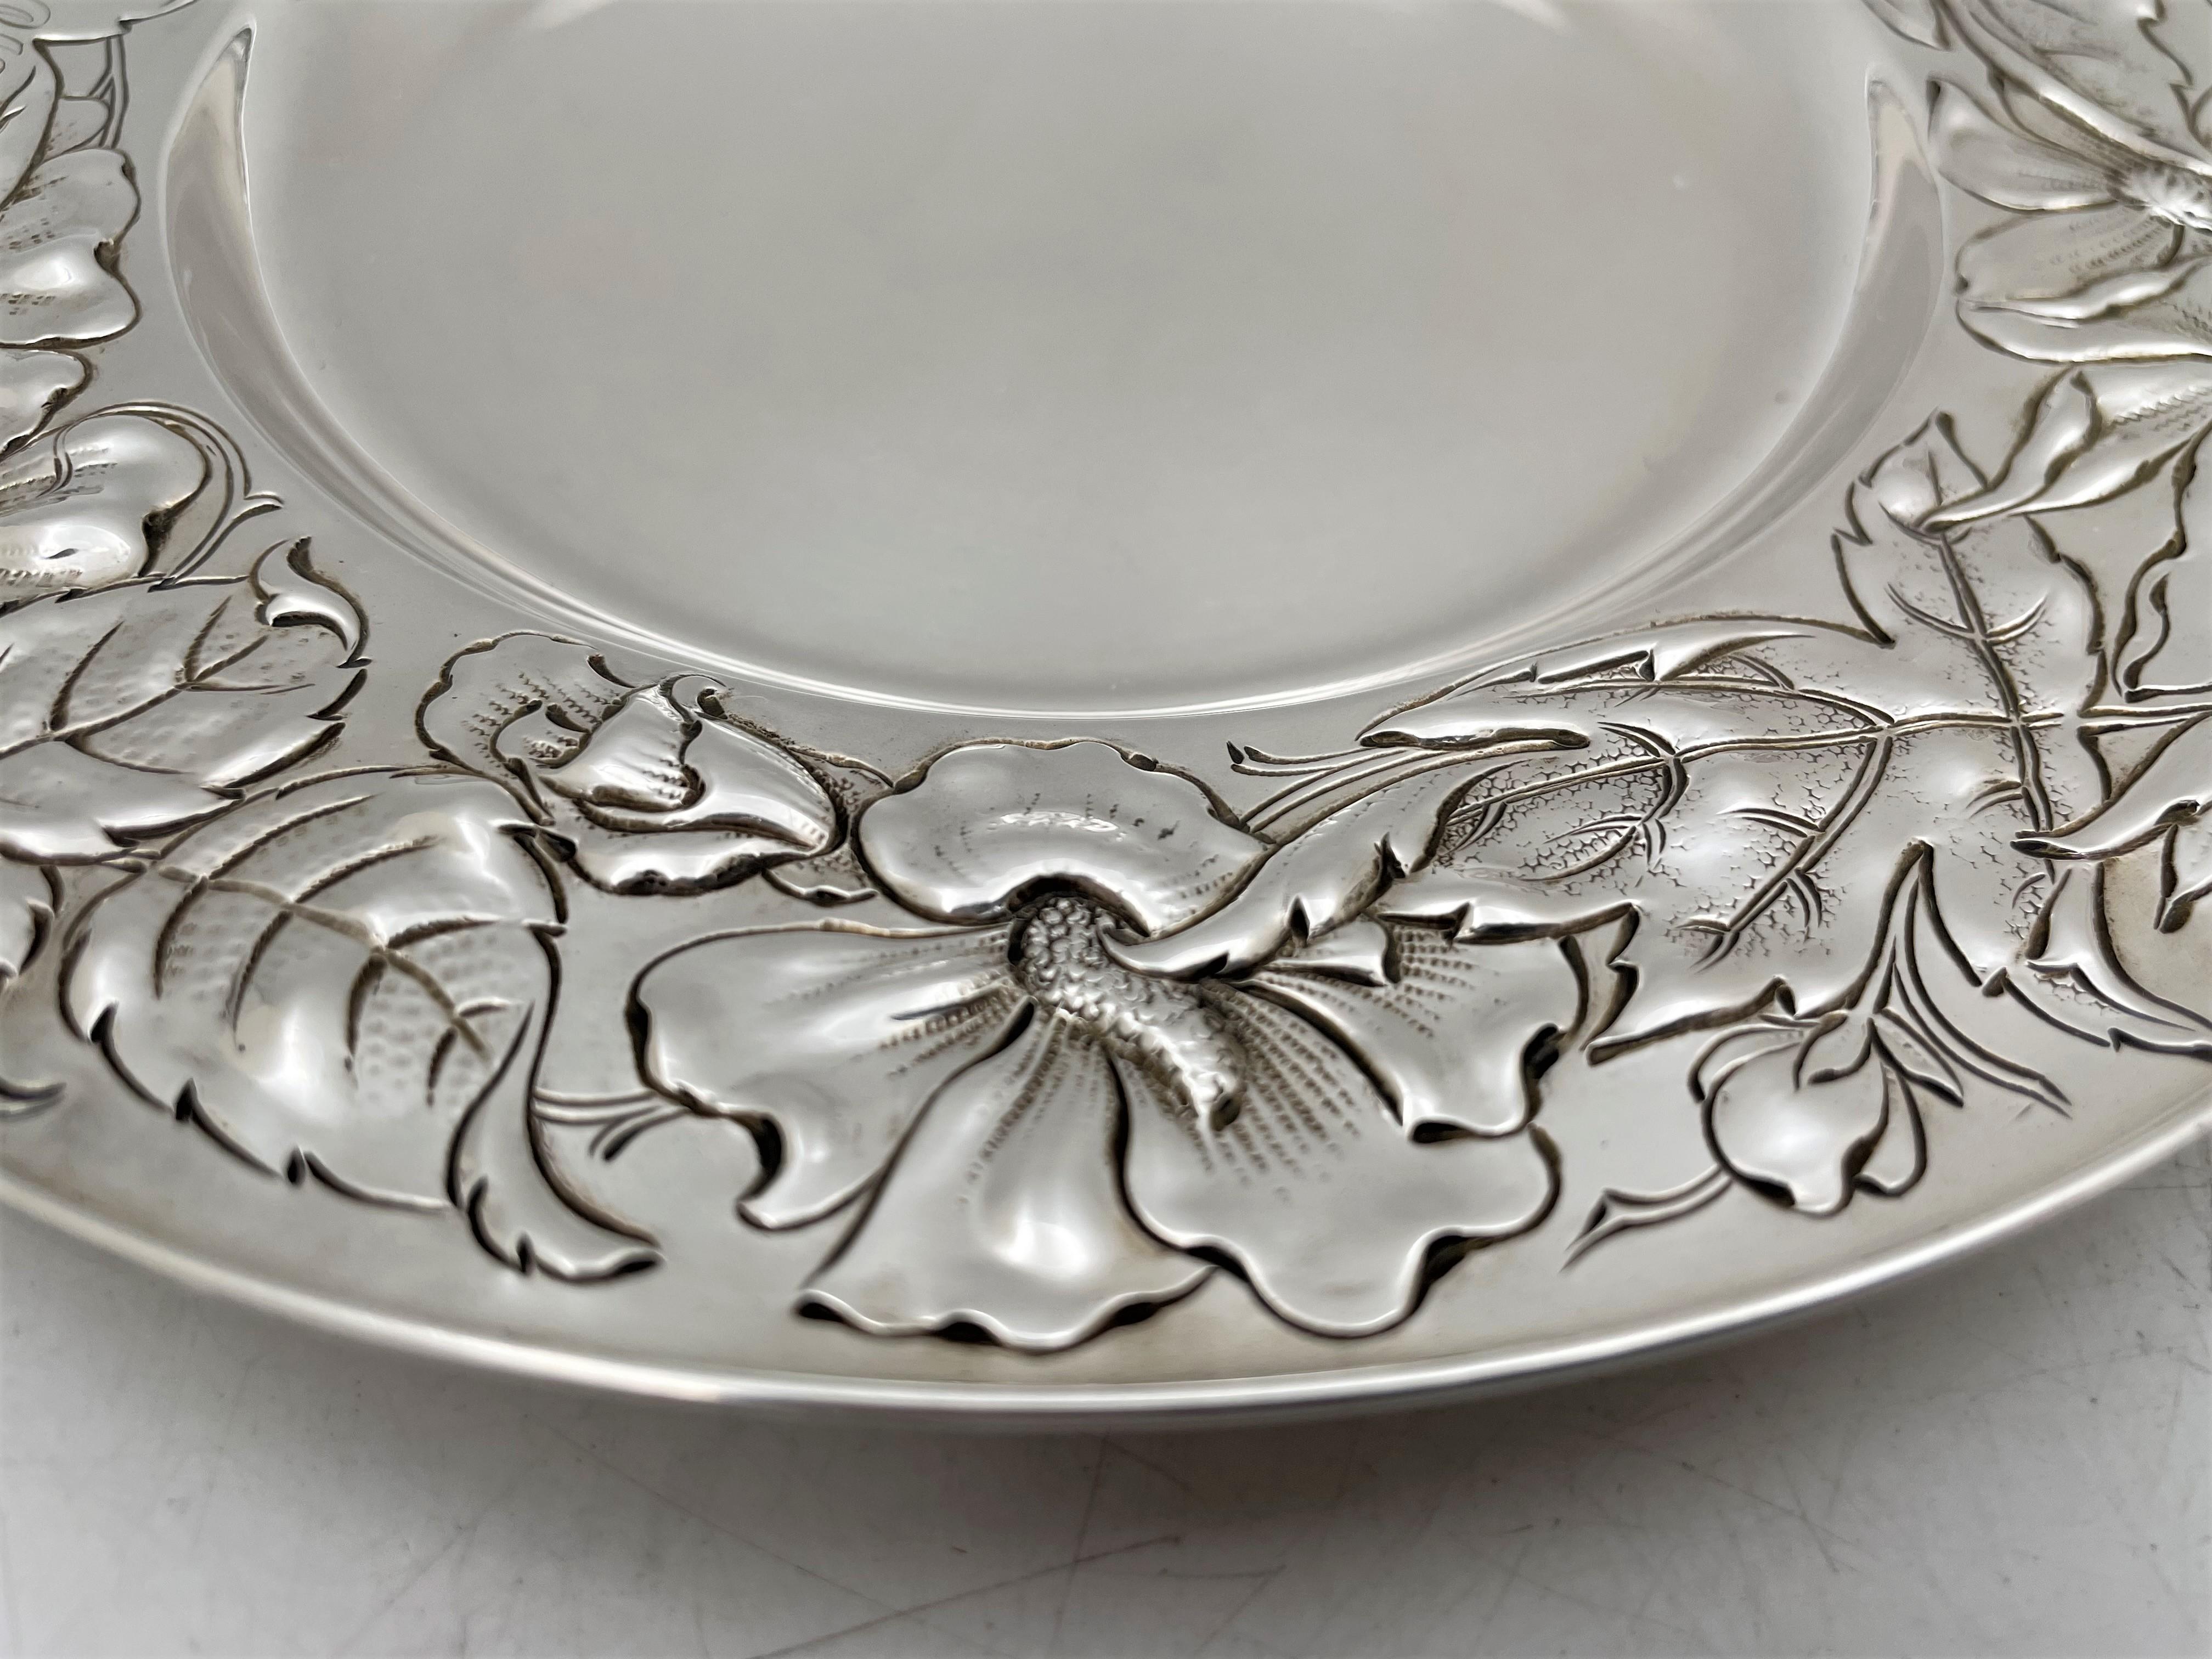 Gorham 1900 Sterling Silver Mug and Underplate in Art Nouveau Martele Style In Good Condition For Sale In New York, NY